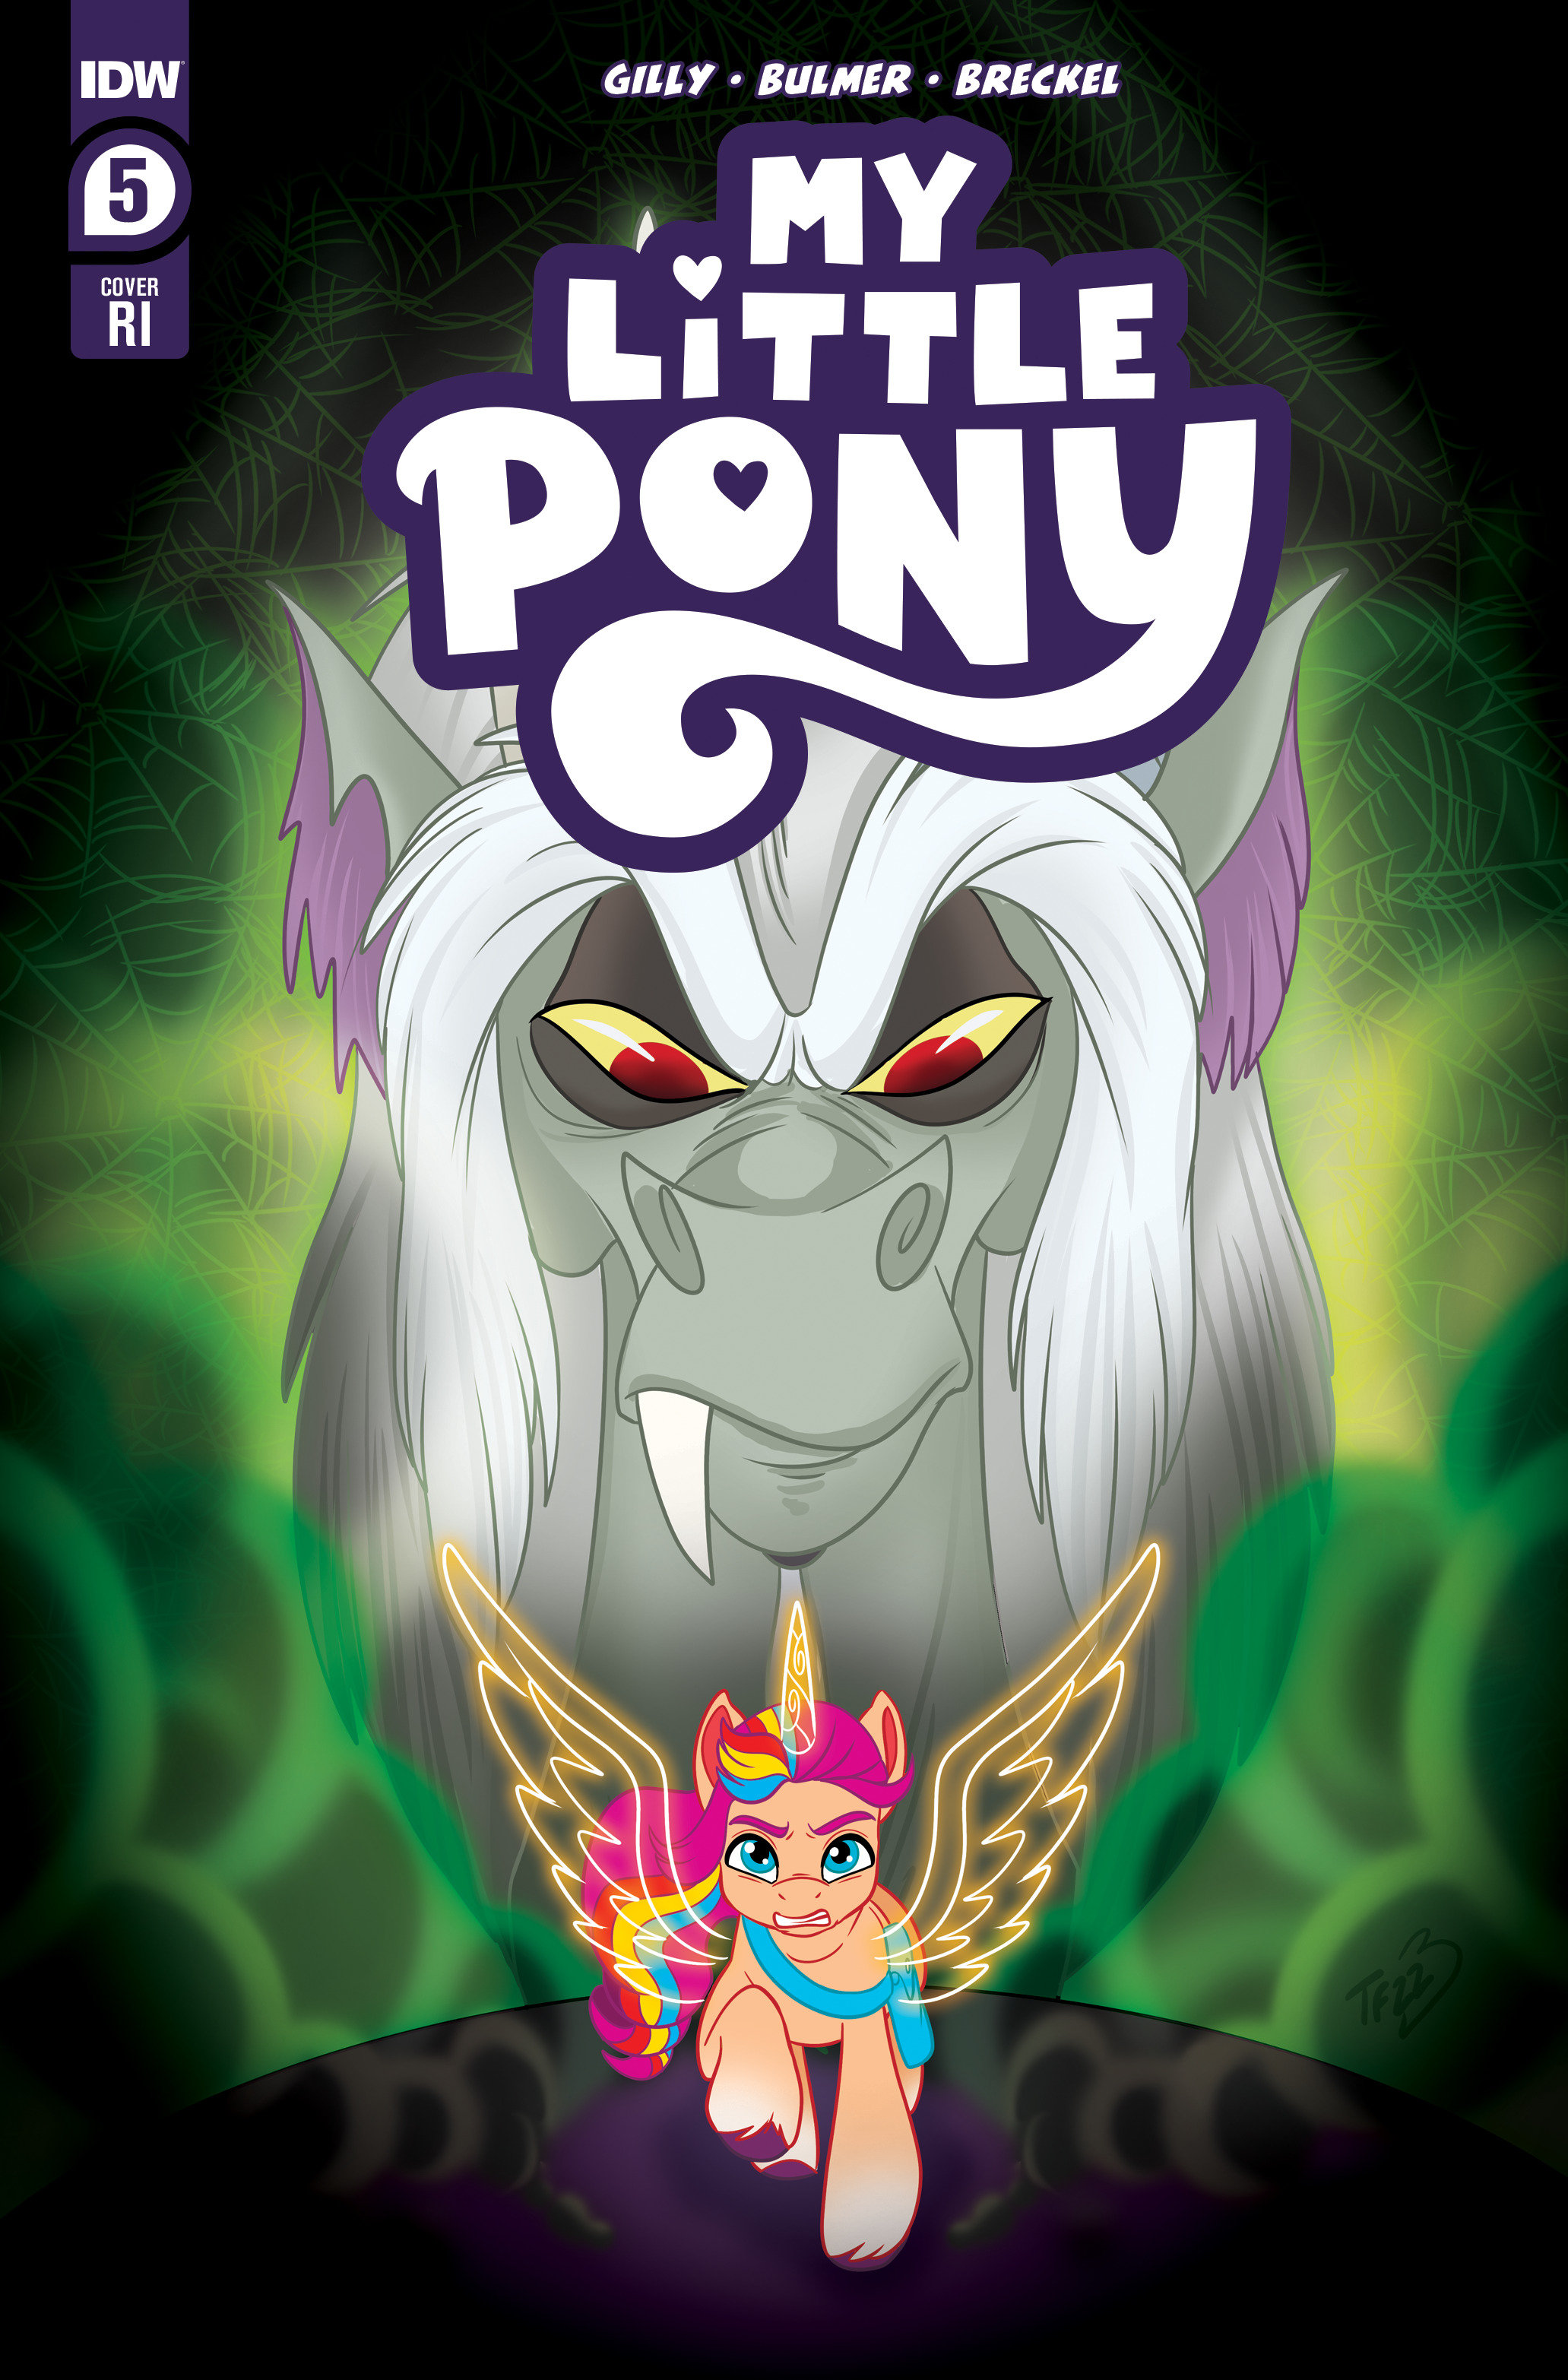 My Little Pony #5 Cover Retailer Incentive Forstner 1 for 10 Incentive